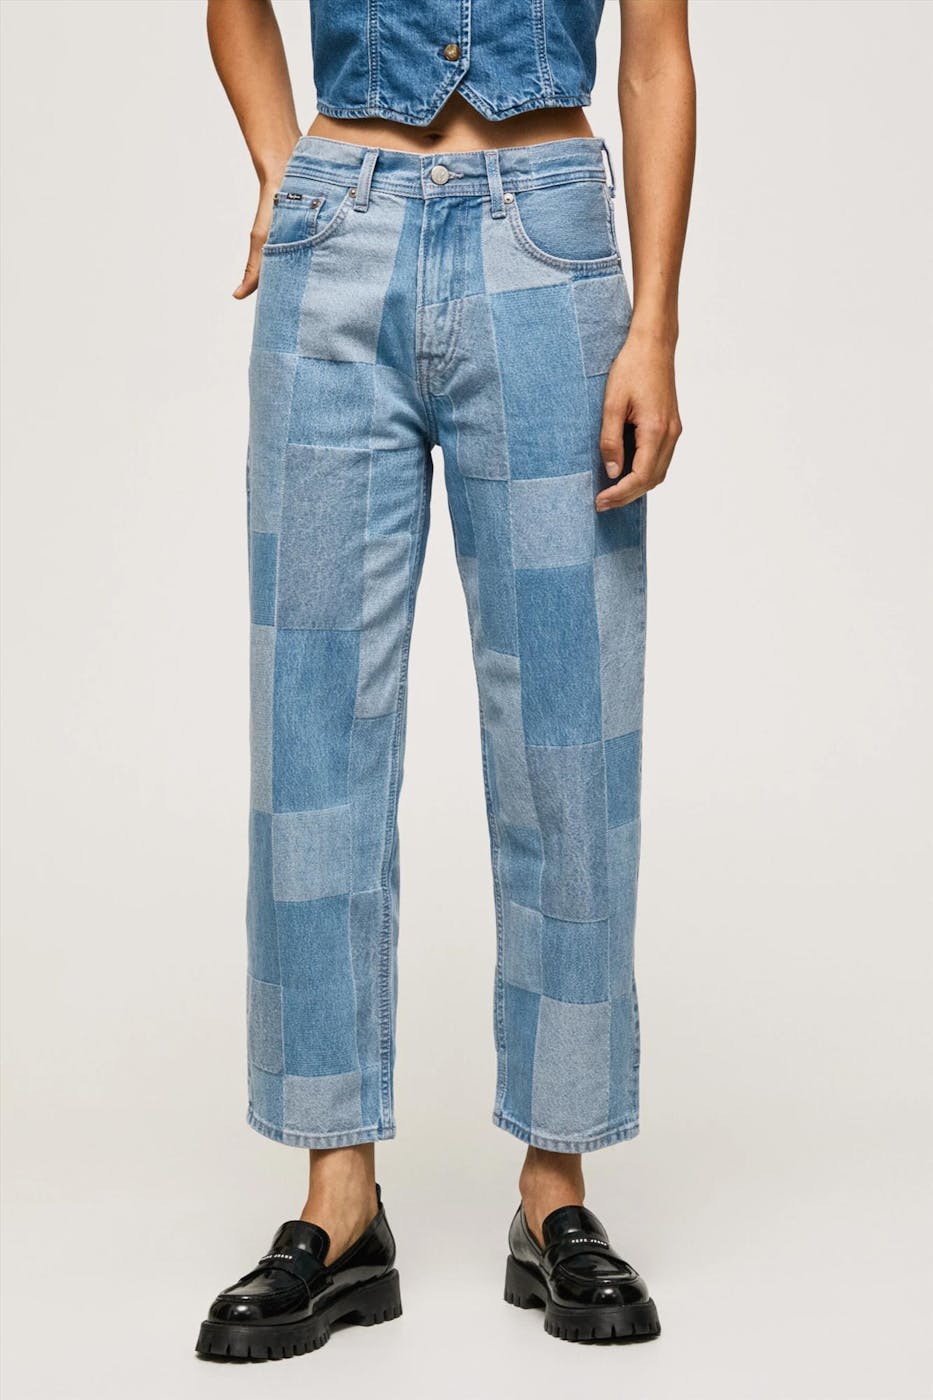 Pepe Jeans London - Lichtblauwe Dover Weave jeans